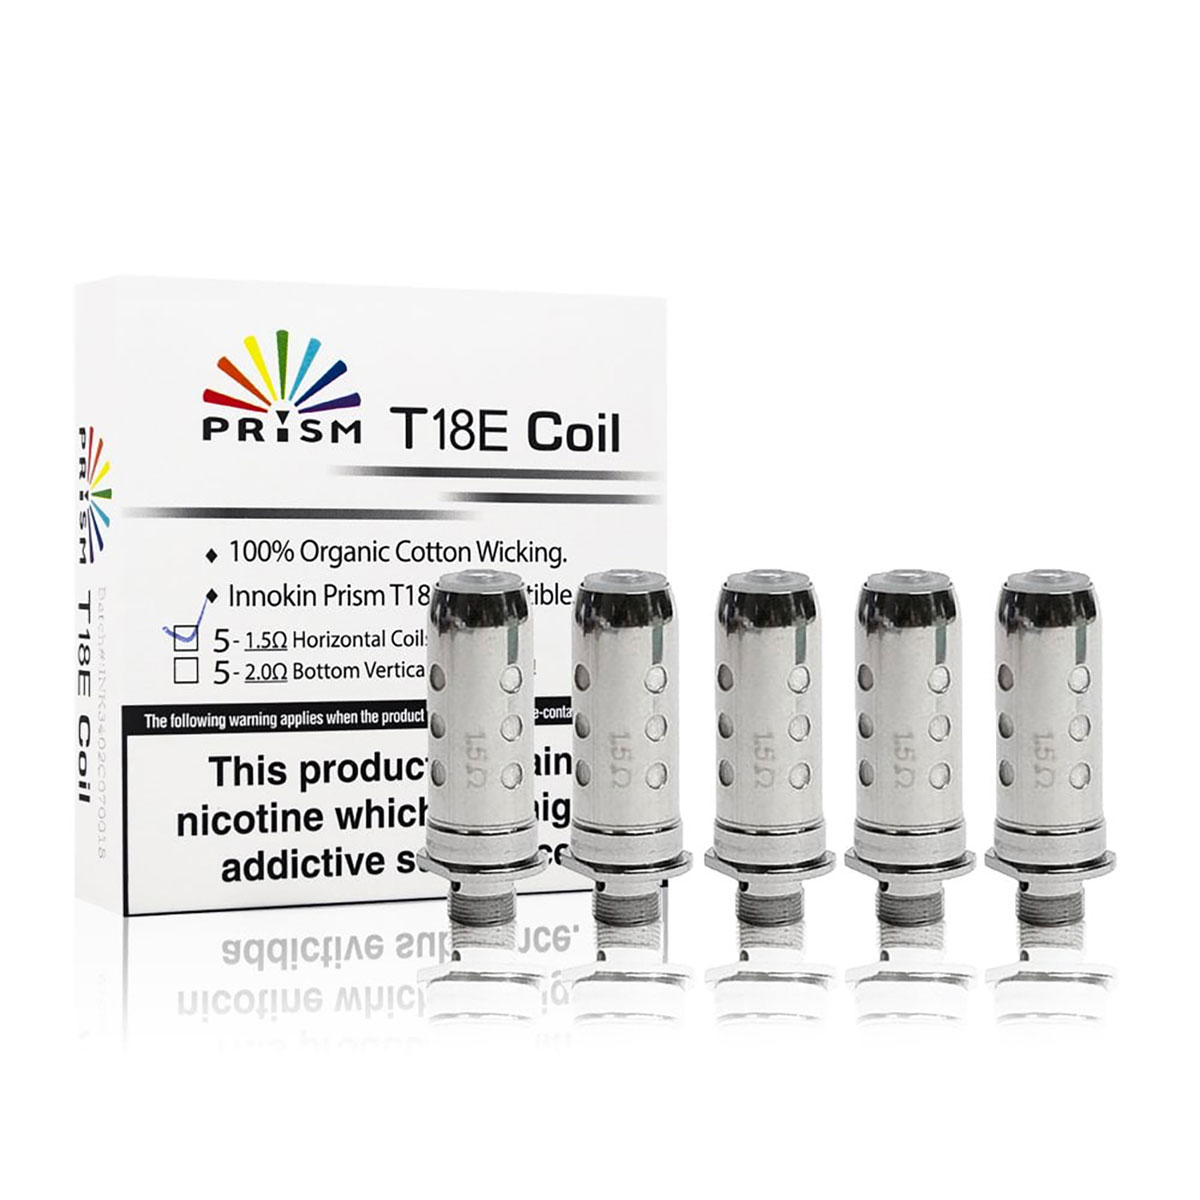 Available at dispergo vaping uk, Prism t18ecoil